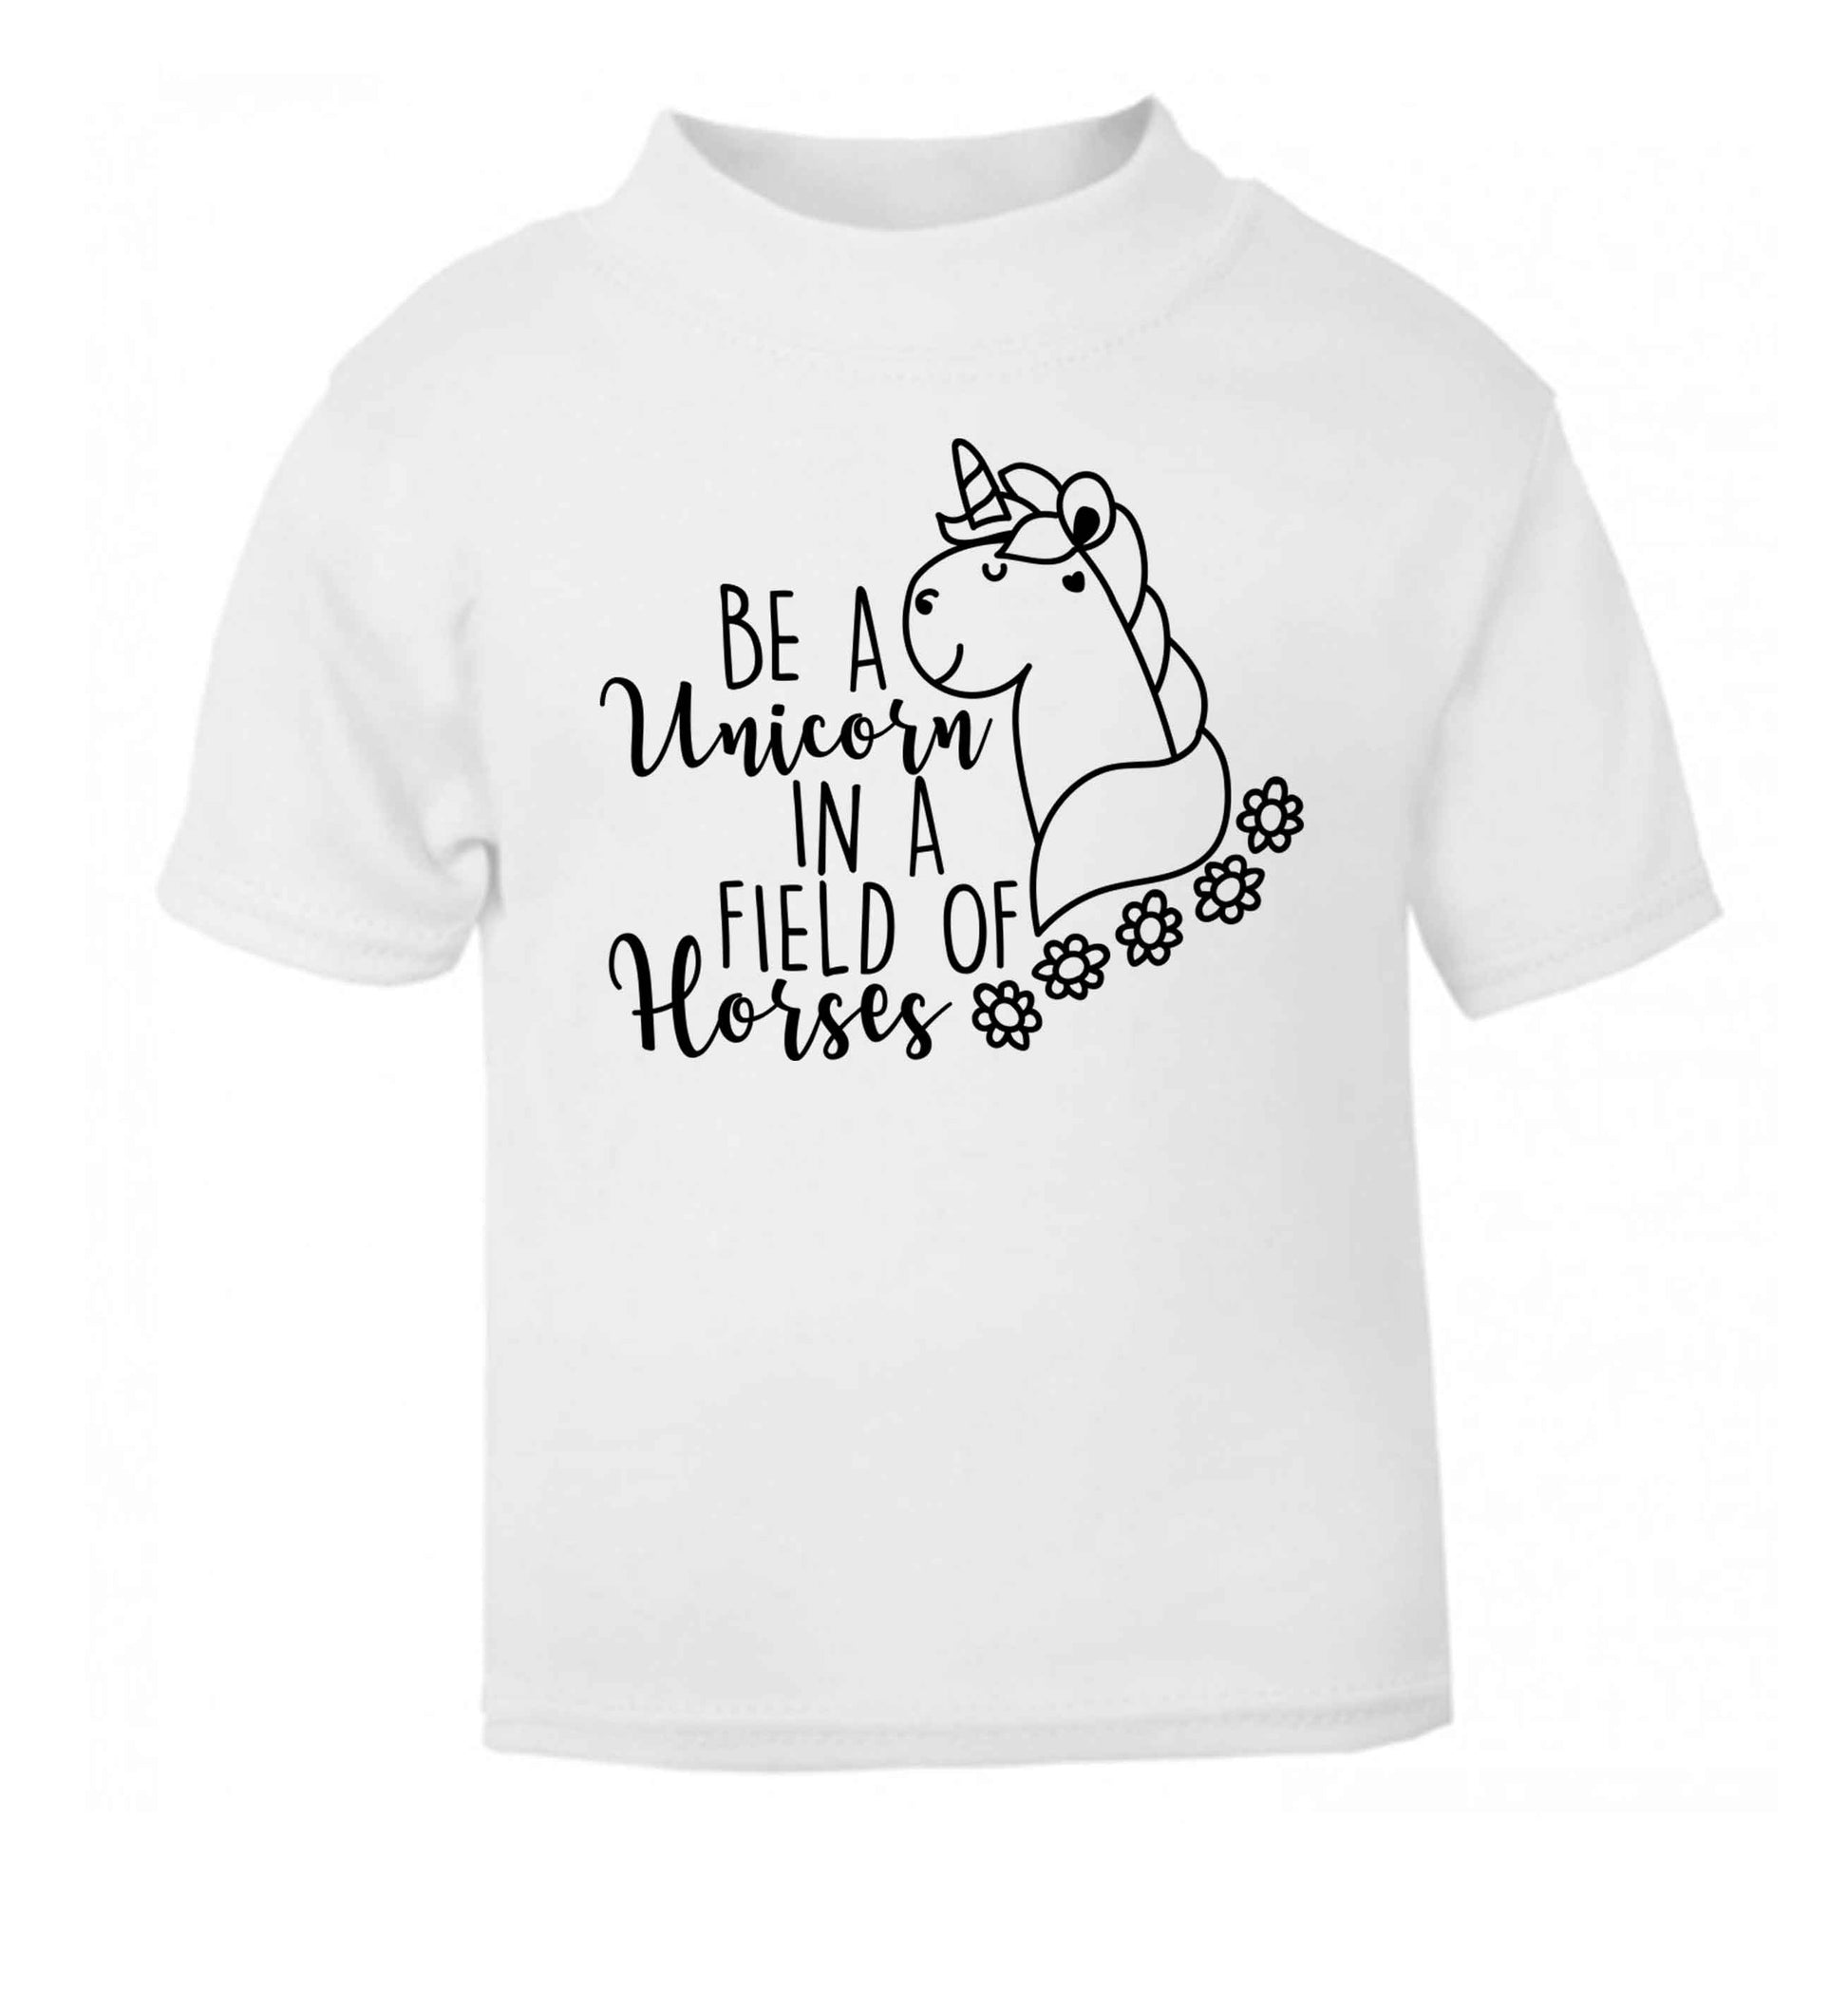 Be a unicorn in a field of horses white Baby Toddler Tshirt 2 Years